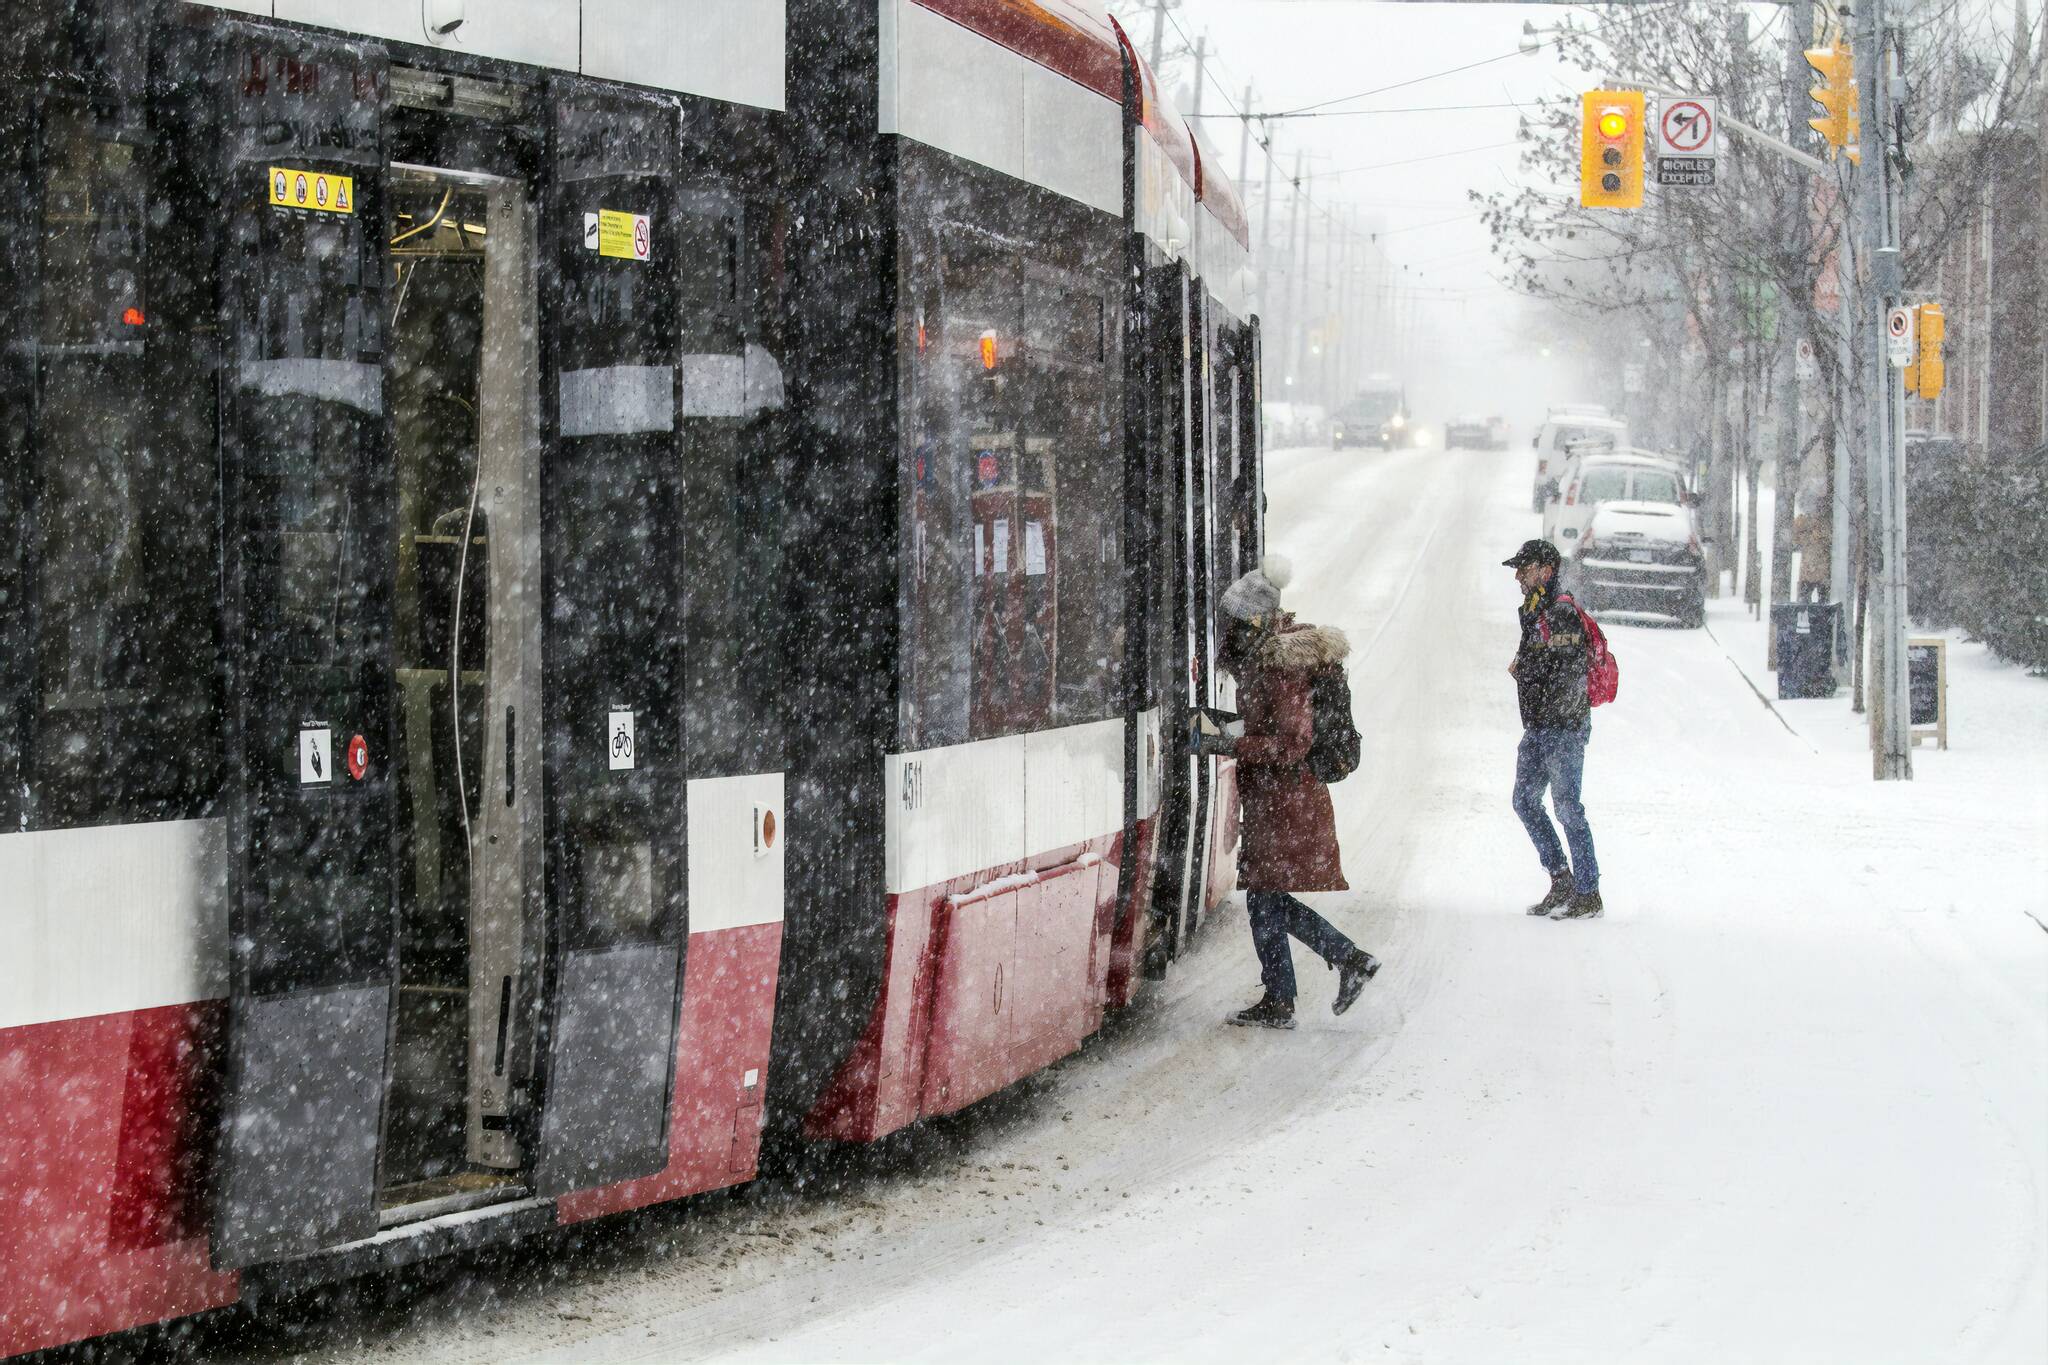 Toronto has already crushed its average snowfall total for the season